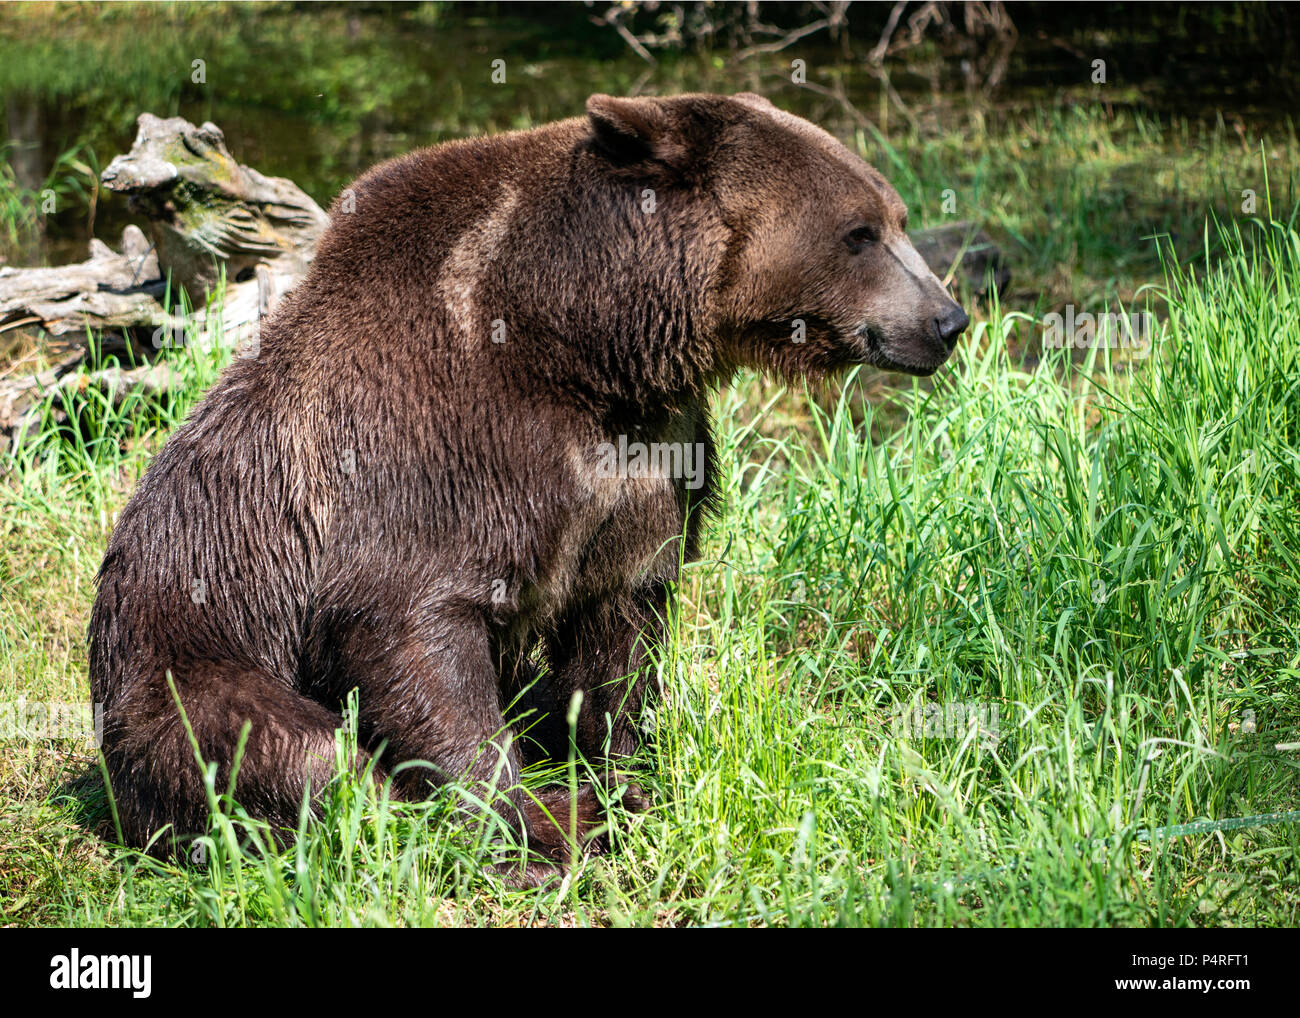 Grizzly Bear Profile Stock Photo